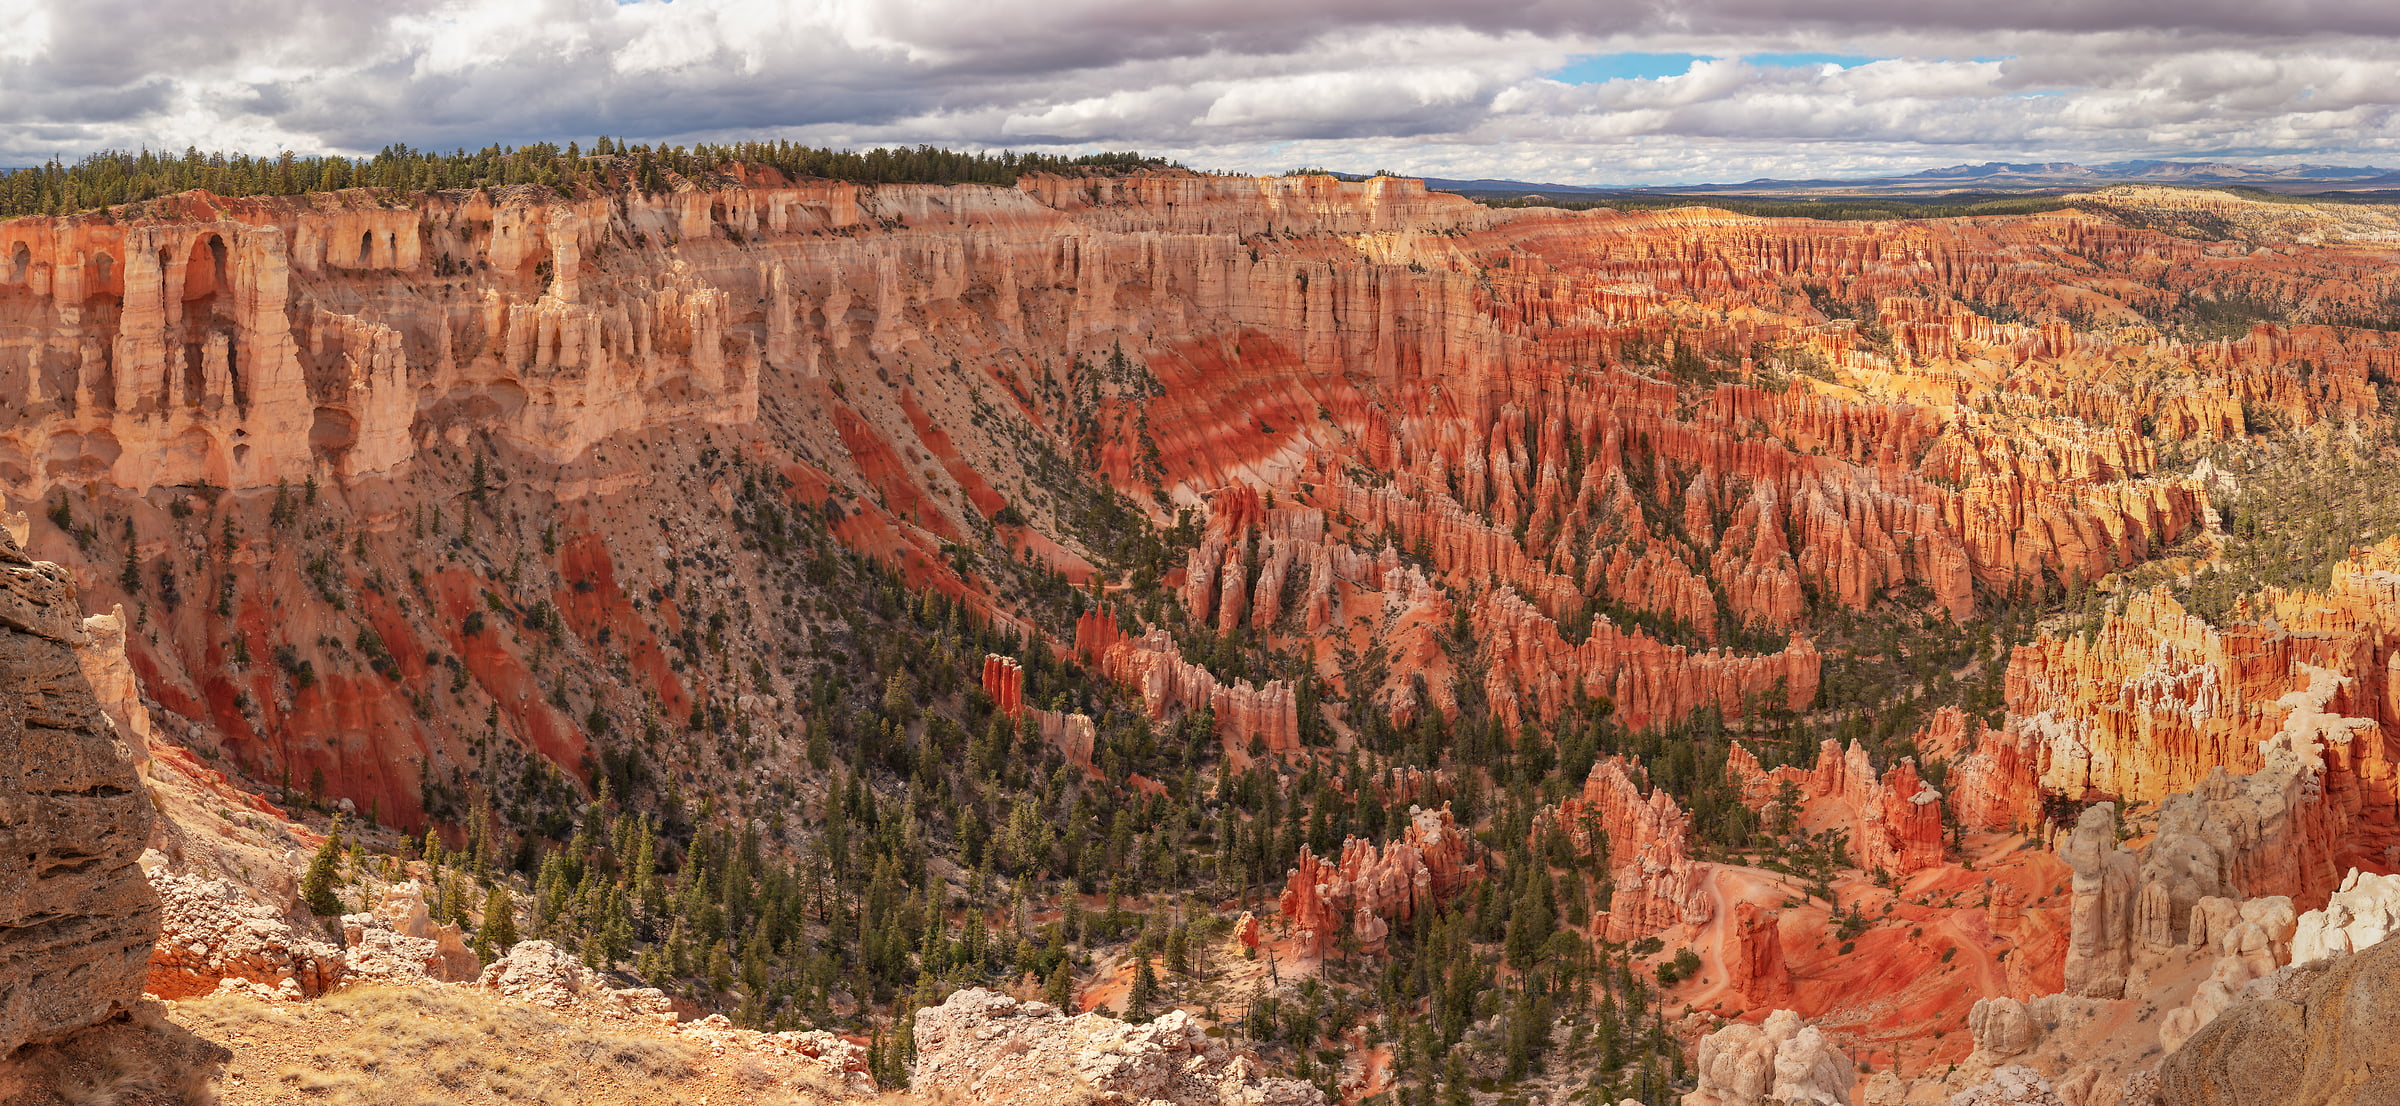 1,664 megapixels! A very high resolution, large-format VAST photo print of Rainbow Point at Bryce Canyon; photograph created by John Freeman at Rainbow Point, Bryce Canyon National Park, Utah